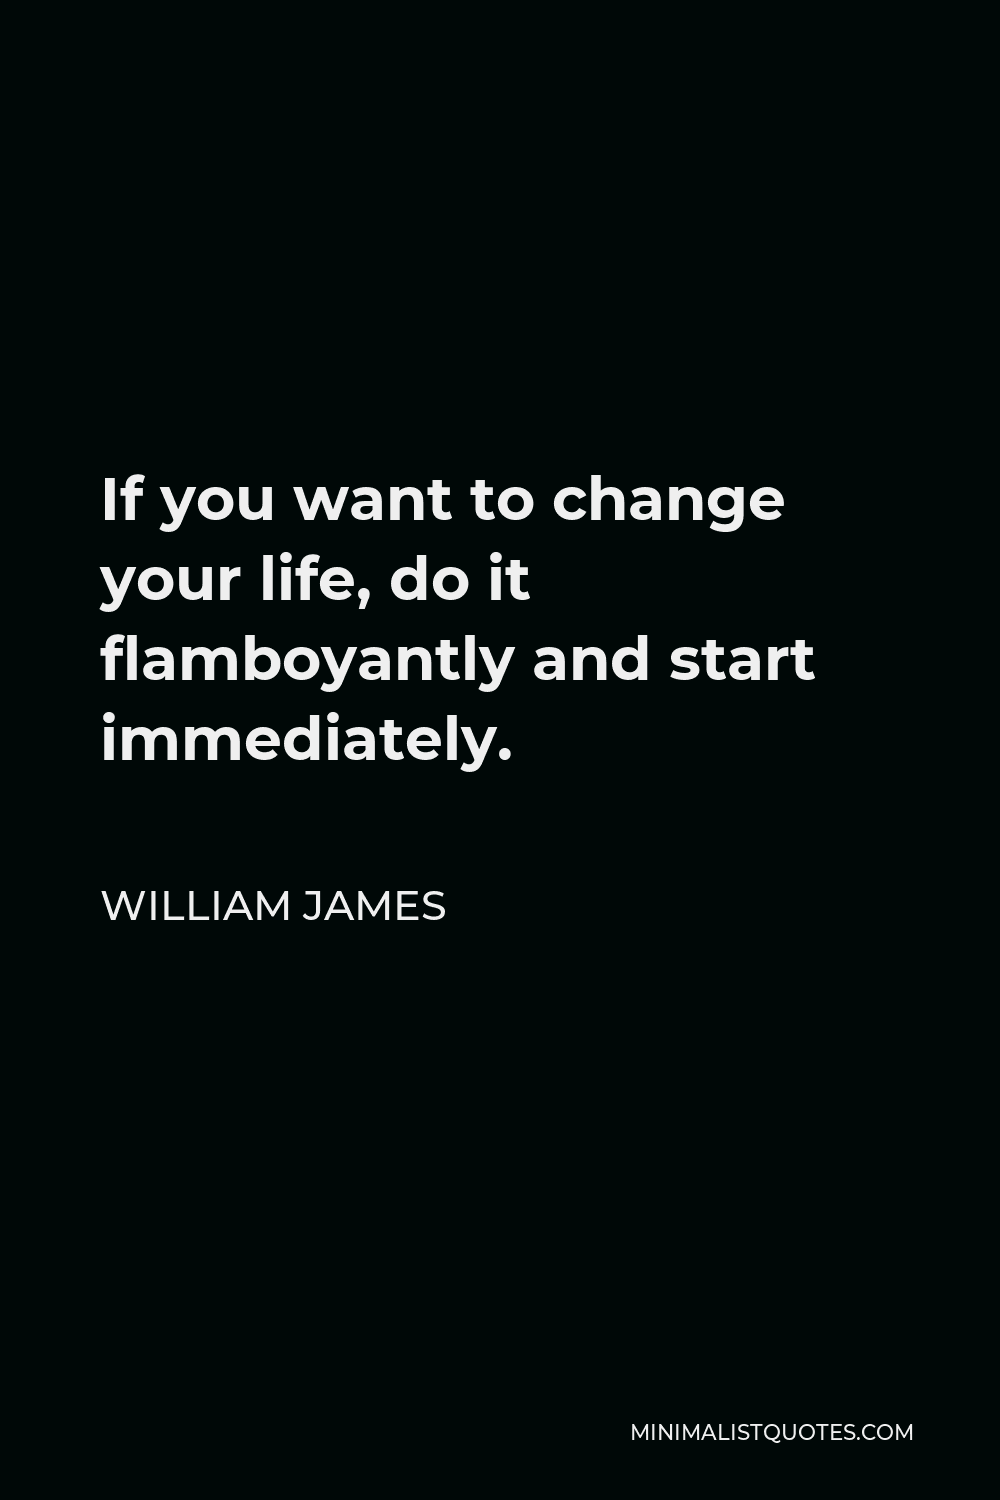 William James Quote - If you want to change your life, do it flamboyantly and start immediately.